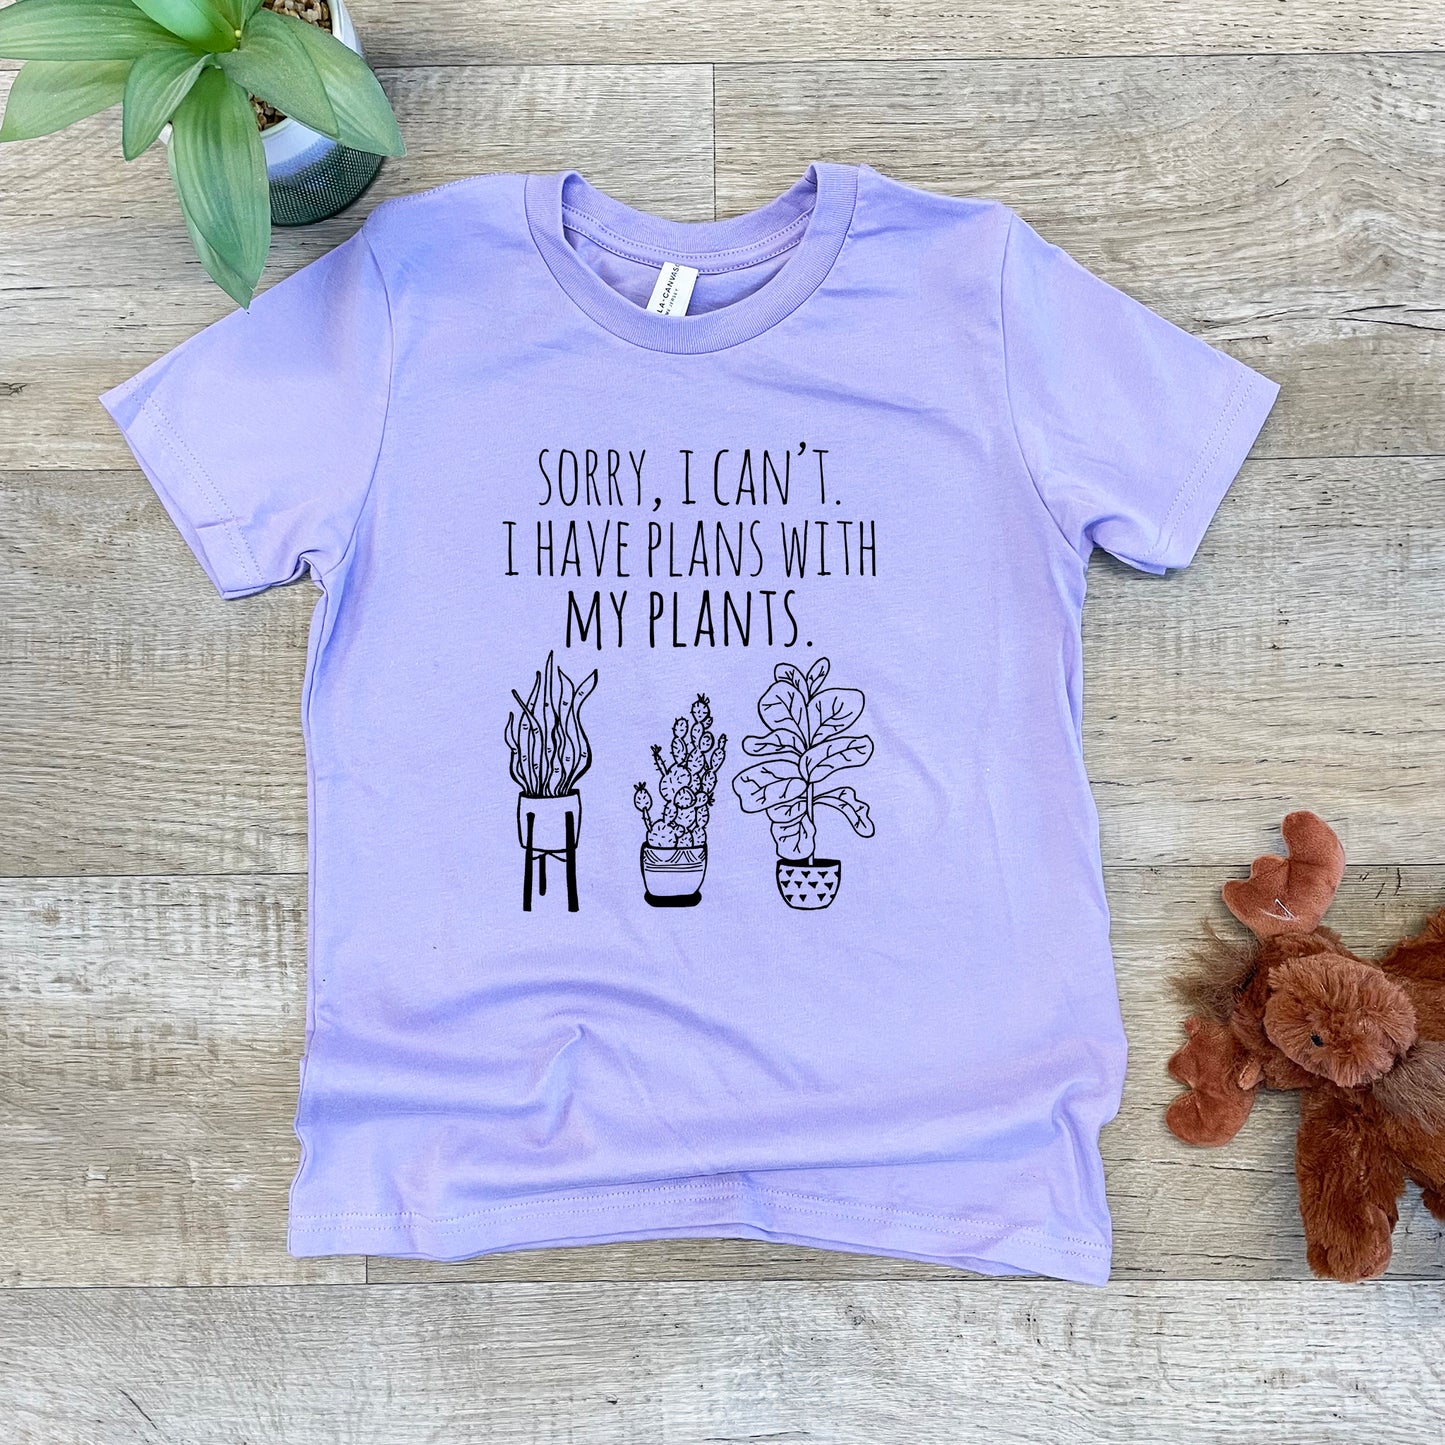 Sorry, I Can't. I Have Plans With My Plants - Kid's Tee - Columbia Blue or Lavender